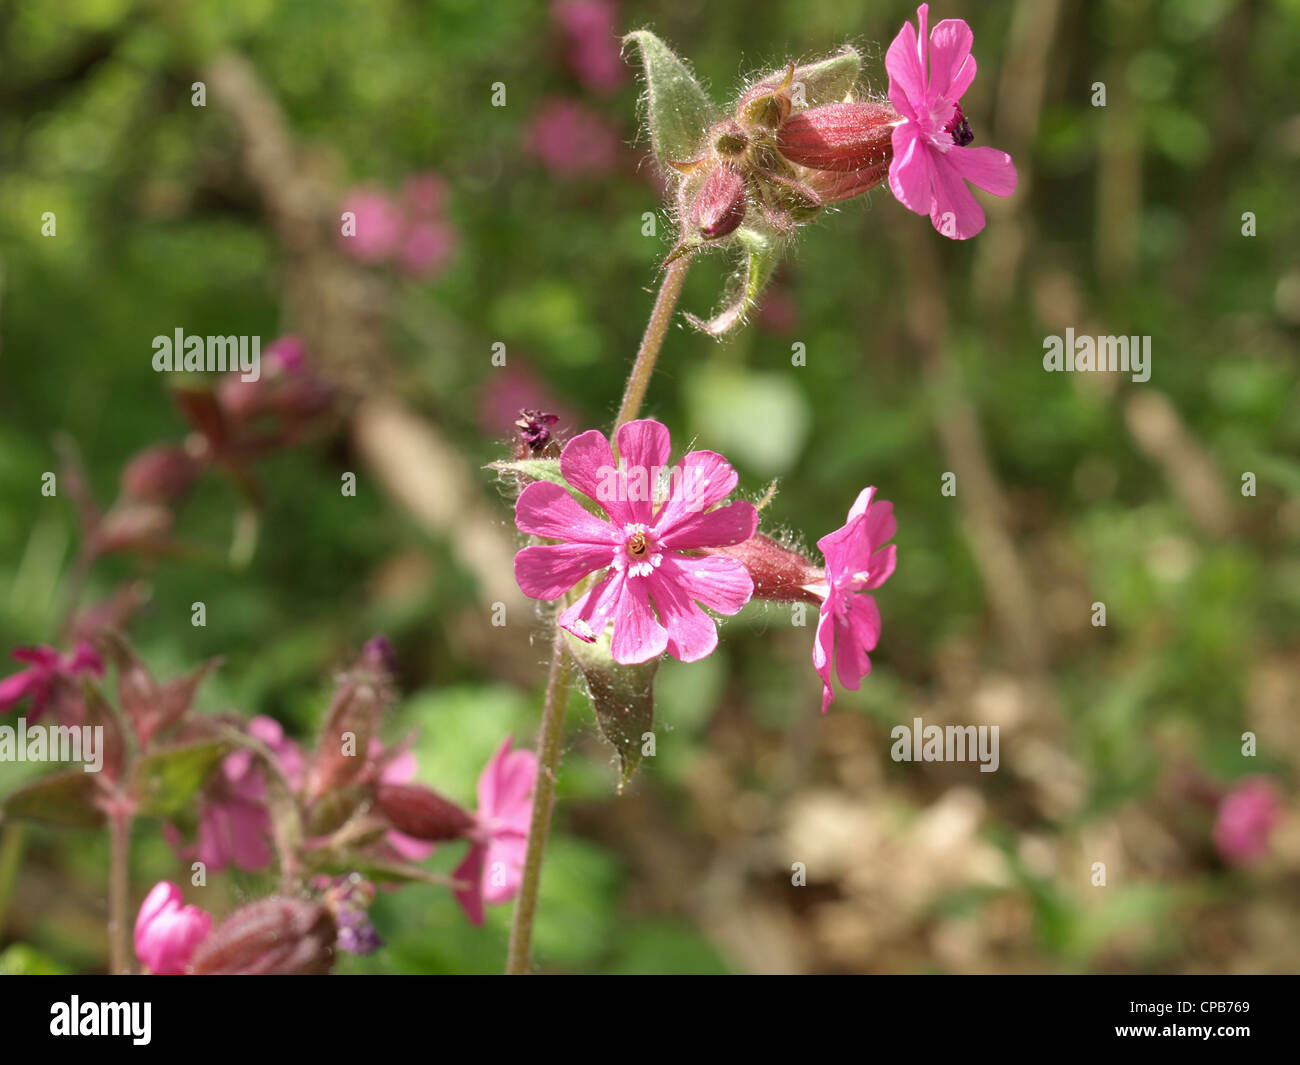 Red campion / Silene dioica / Rote Lichtnelke Stock Photo